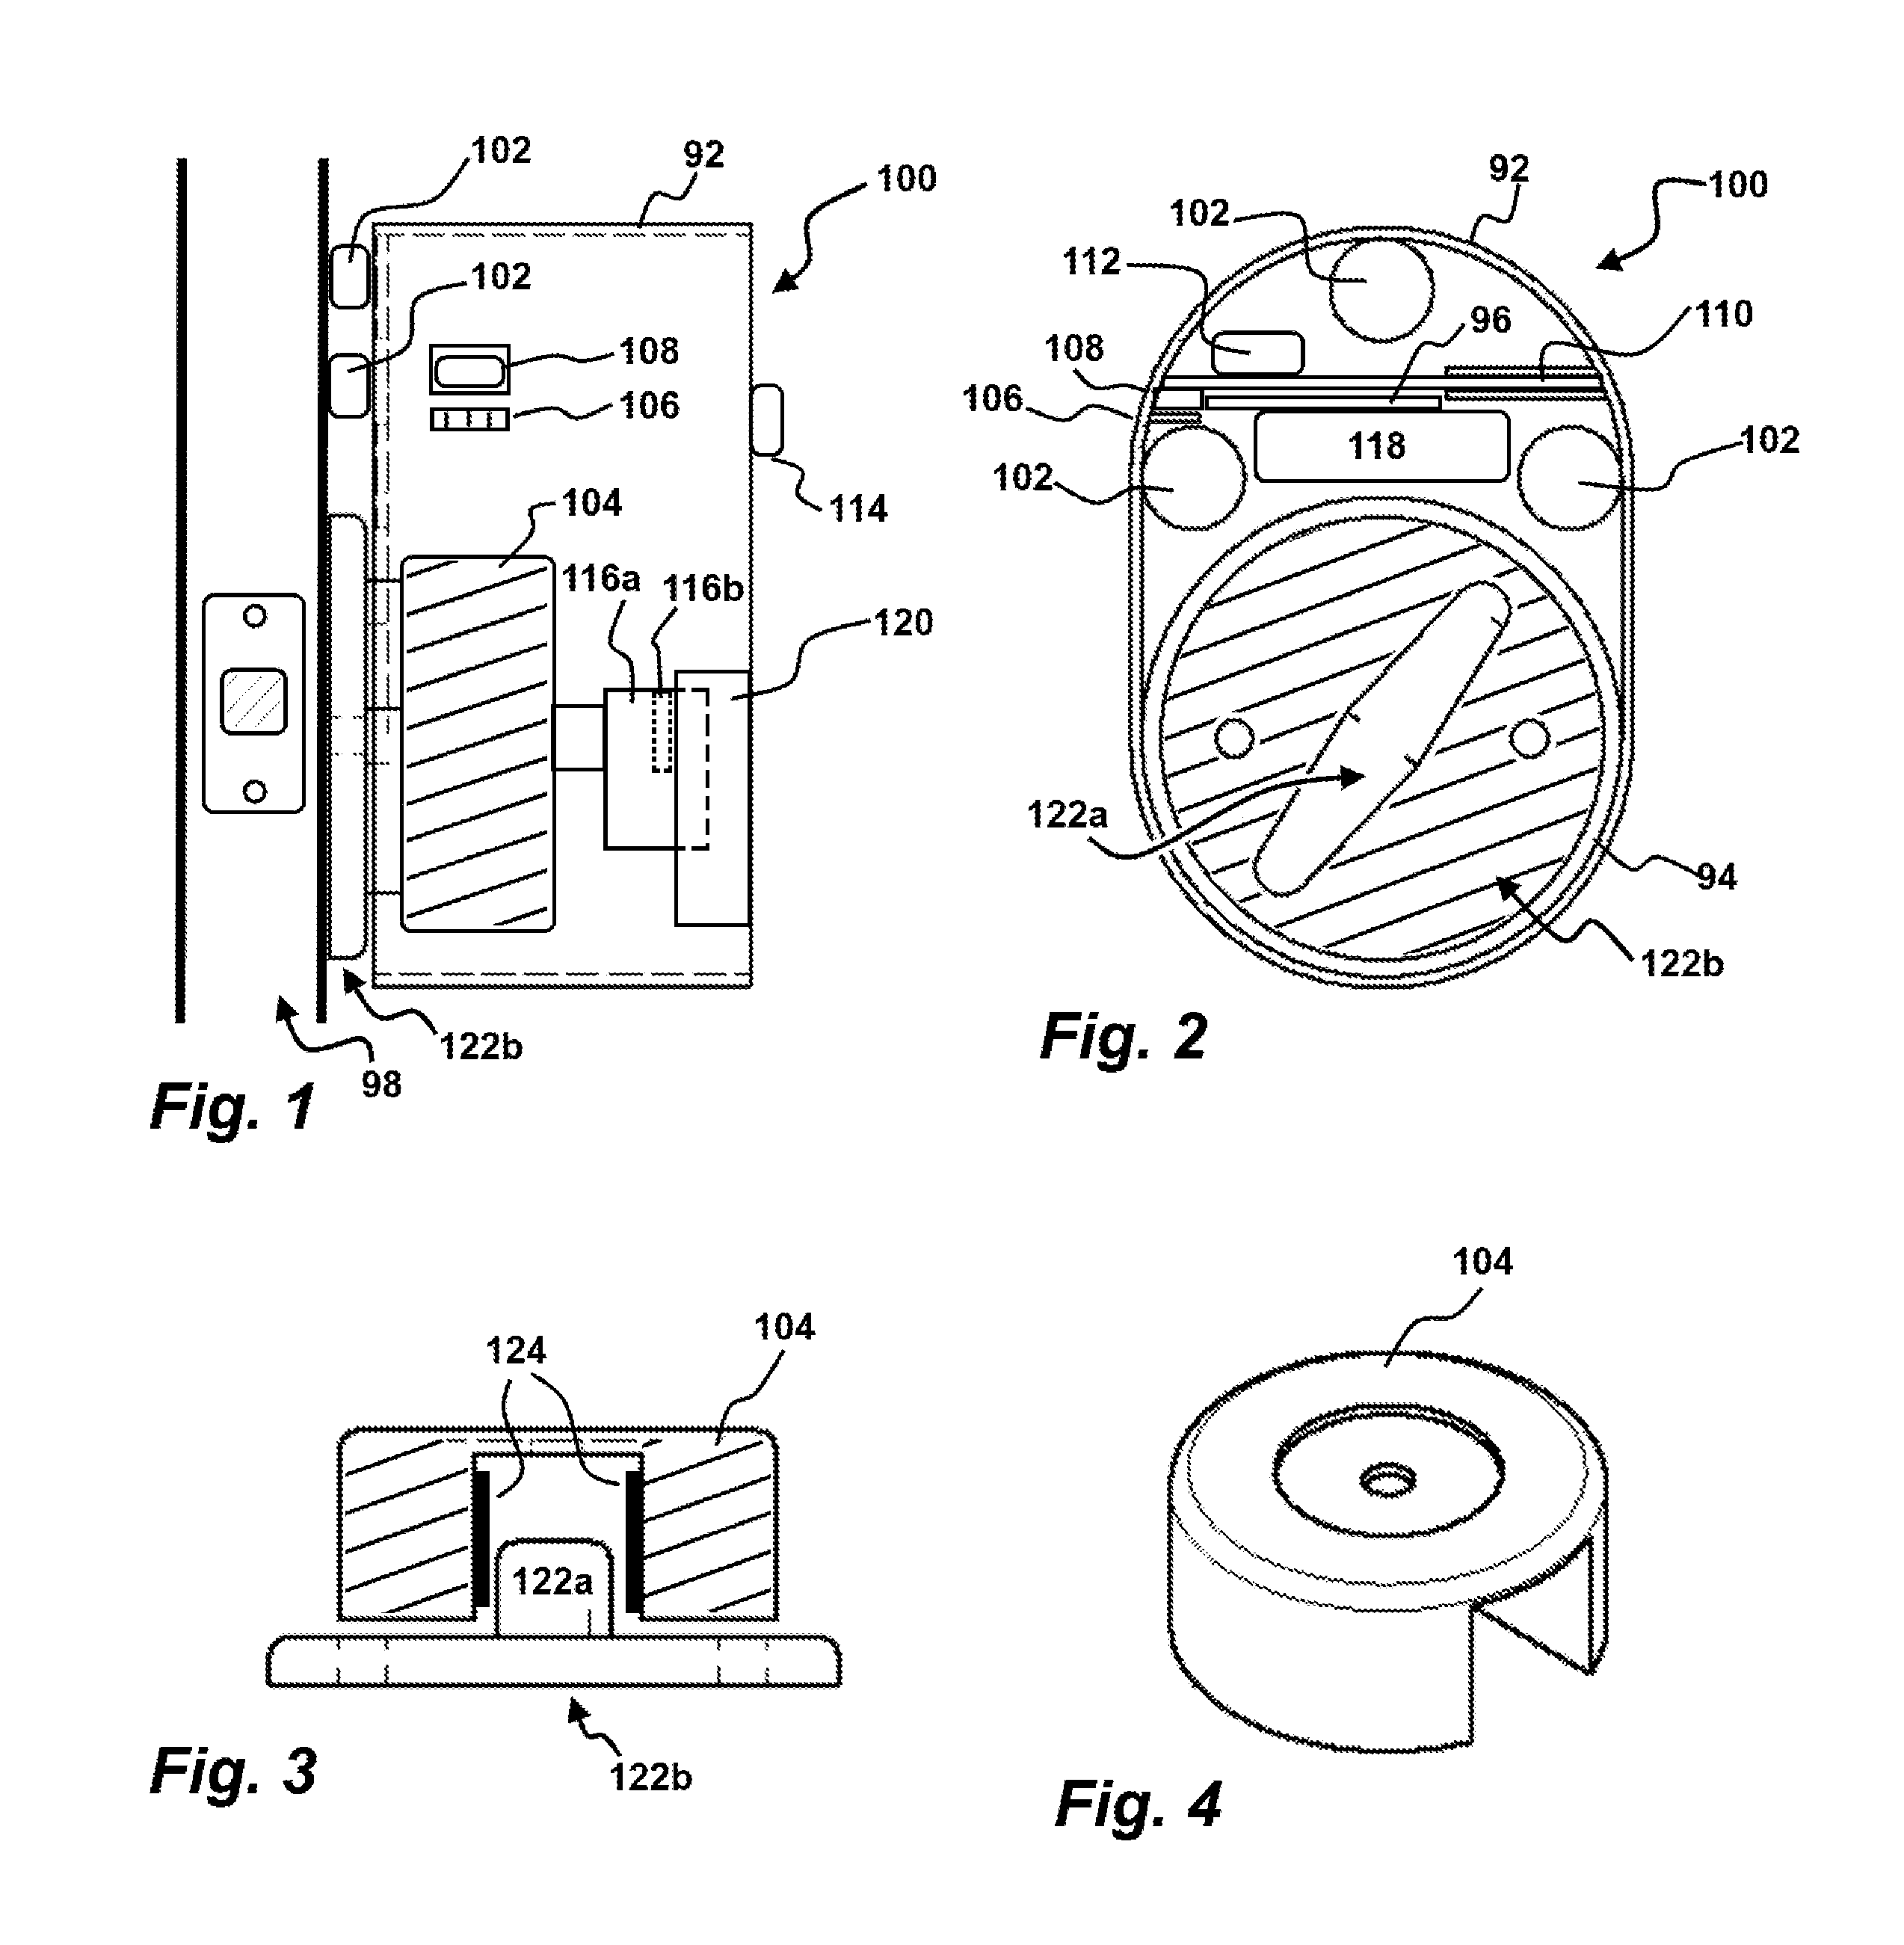 Installation-Free Rechargeable Door Locking Apparatus, Systems and Methods